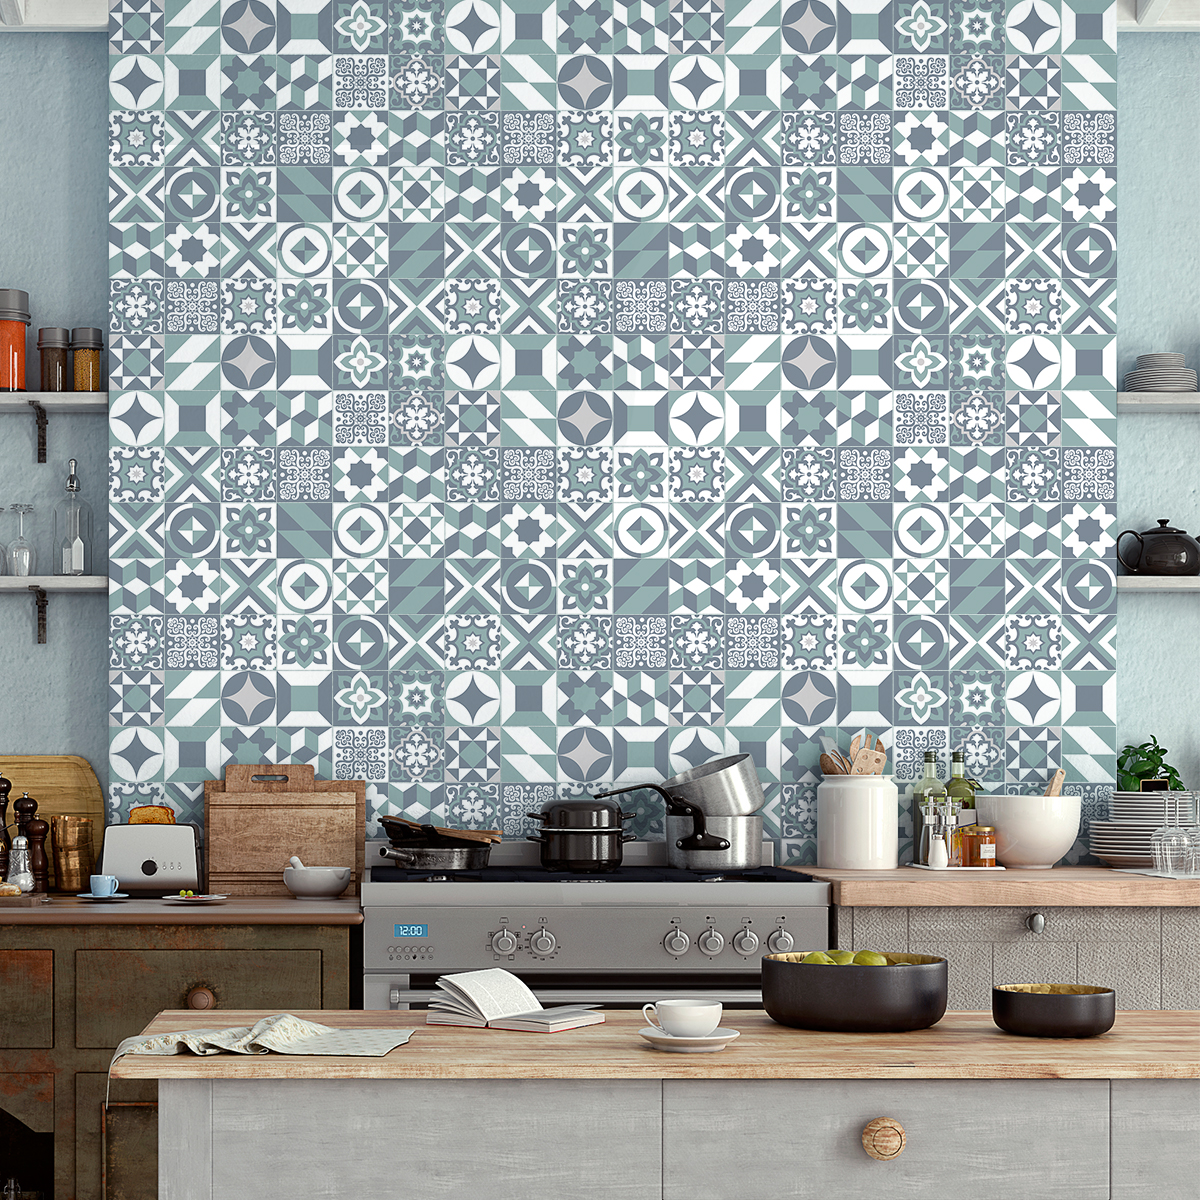 60 wall stickers cement tiles azulejos paoli